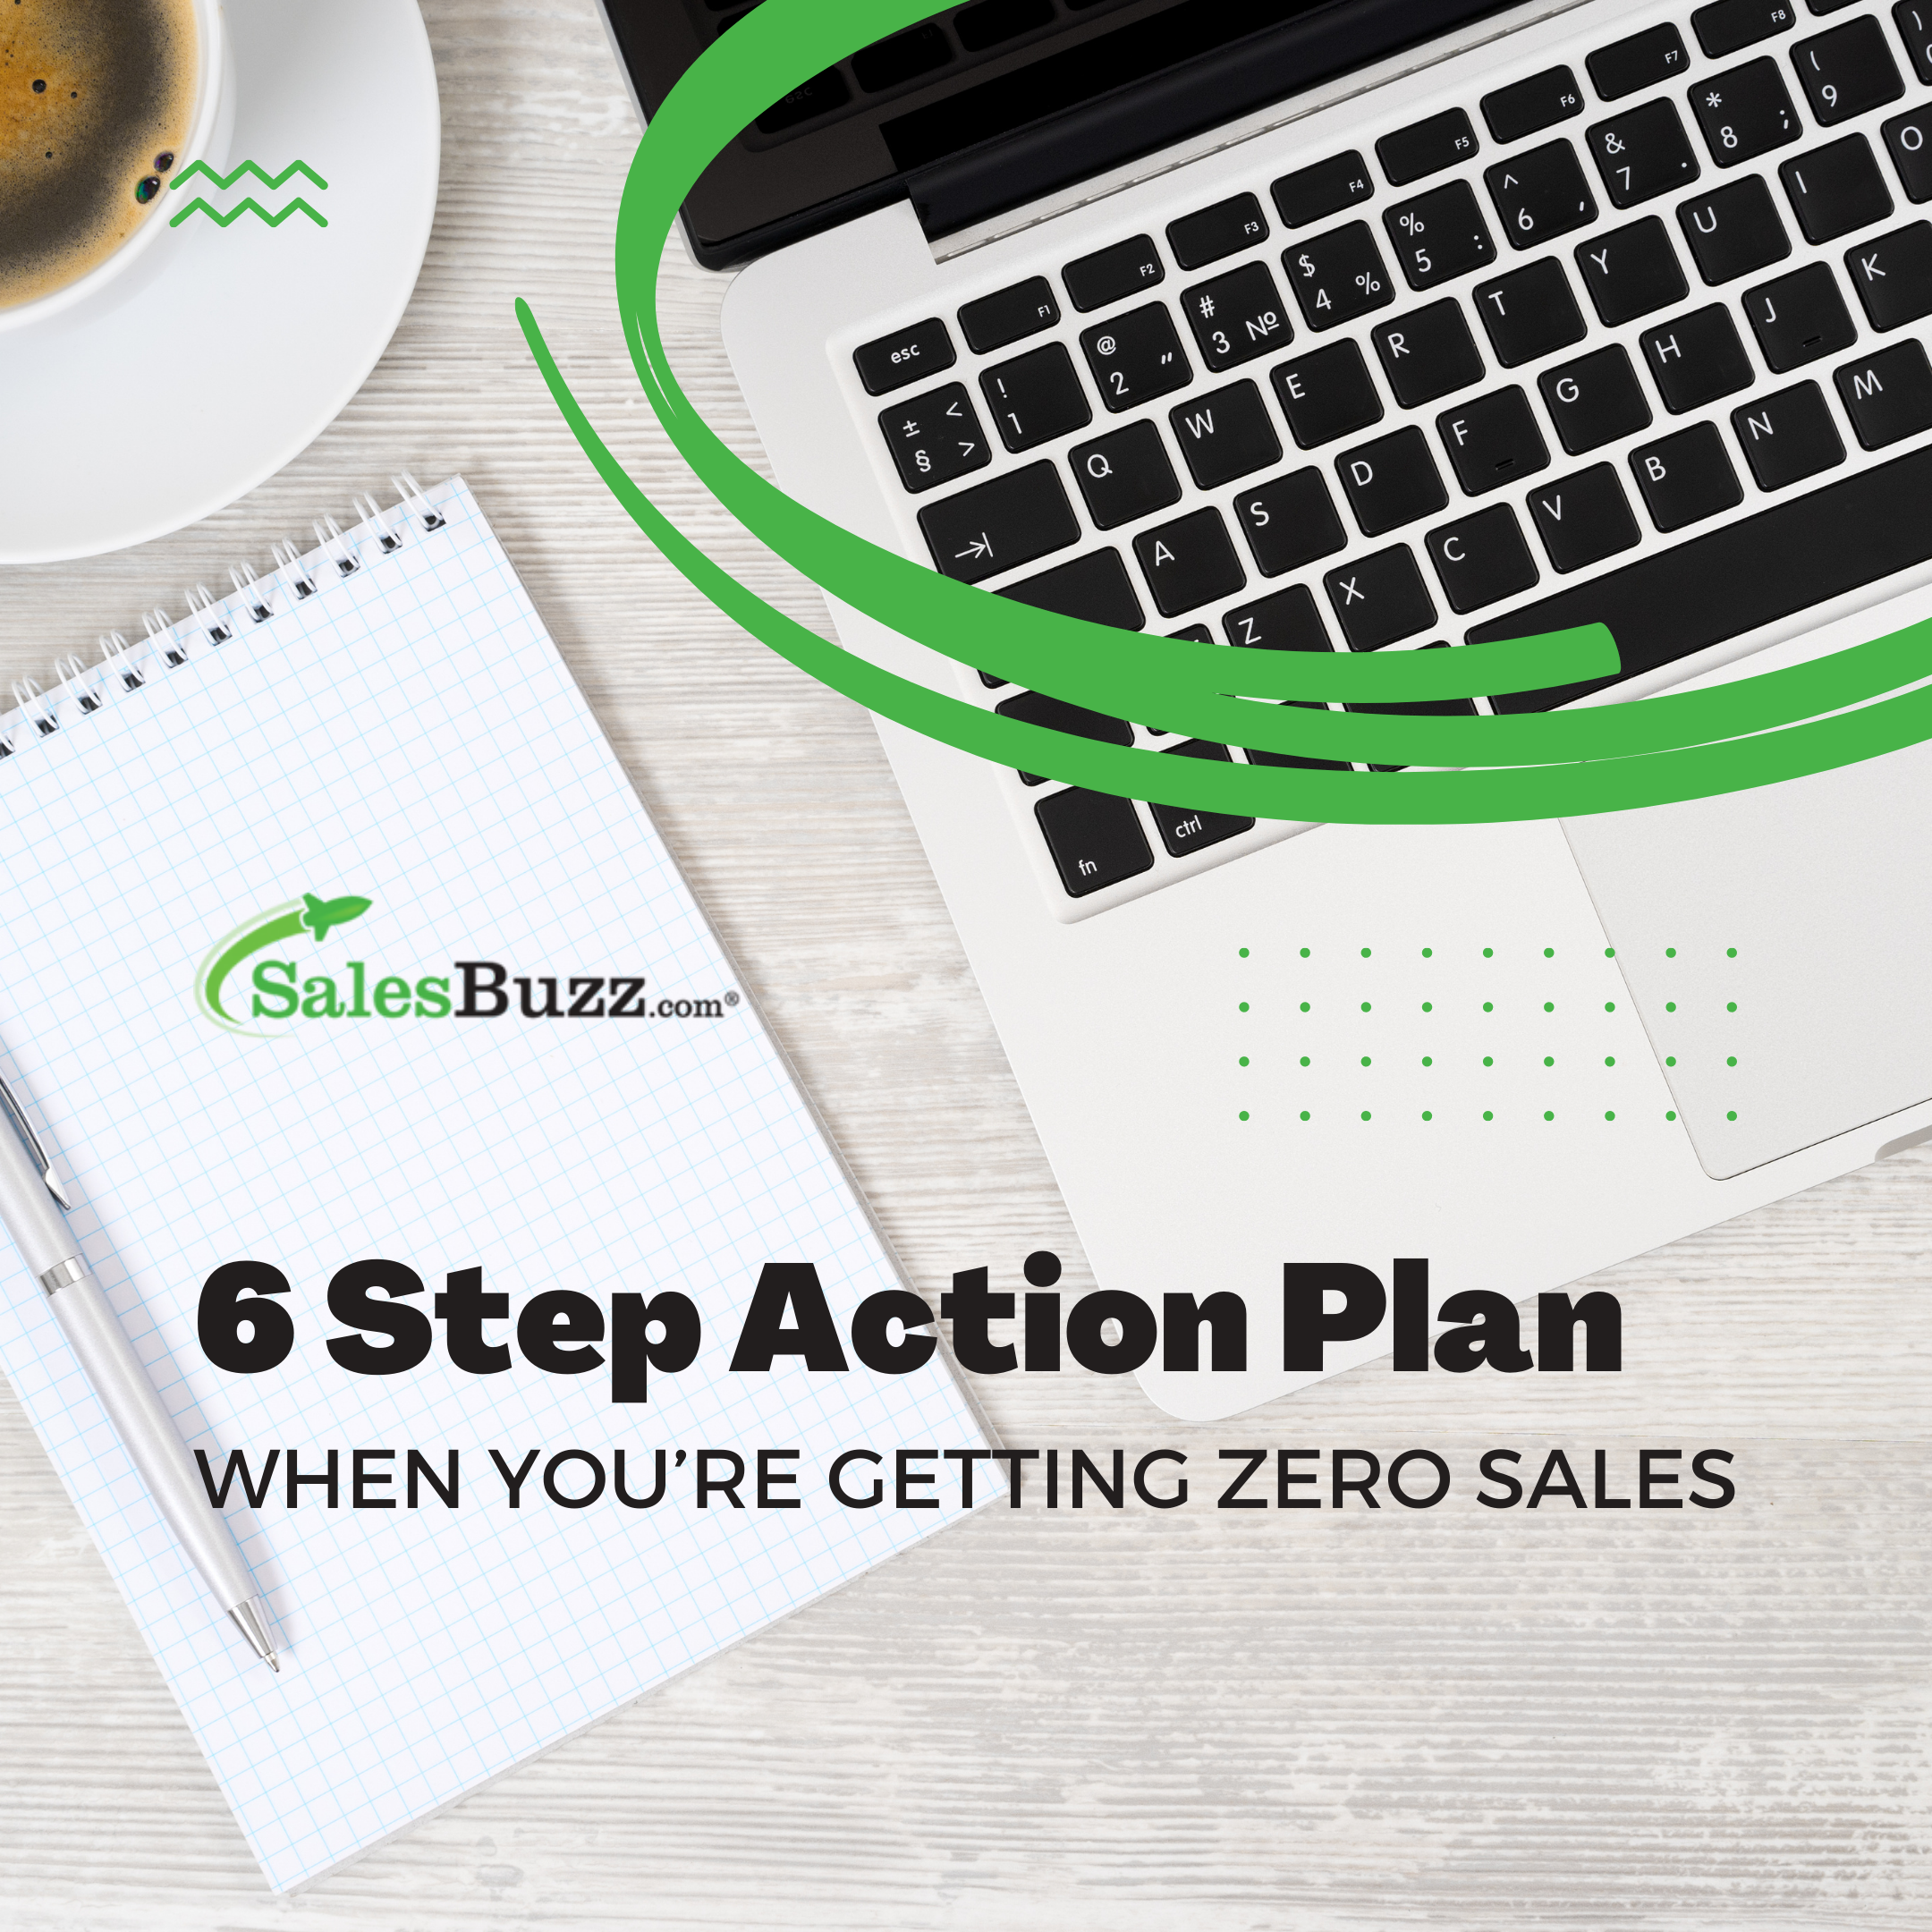 6 Step Action Plan When You’re Getting Zero Sales